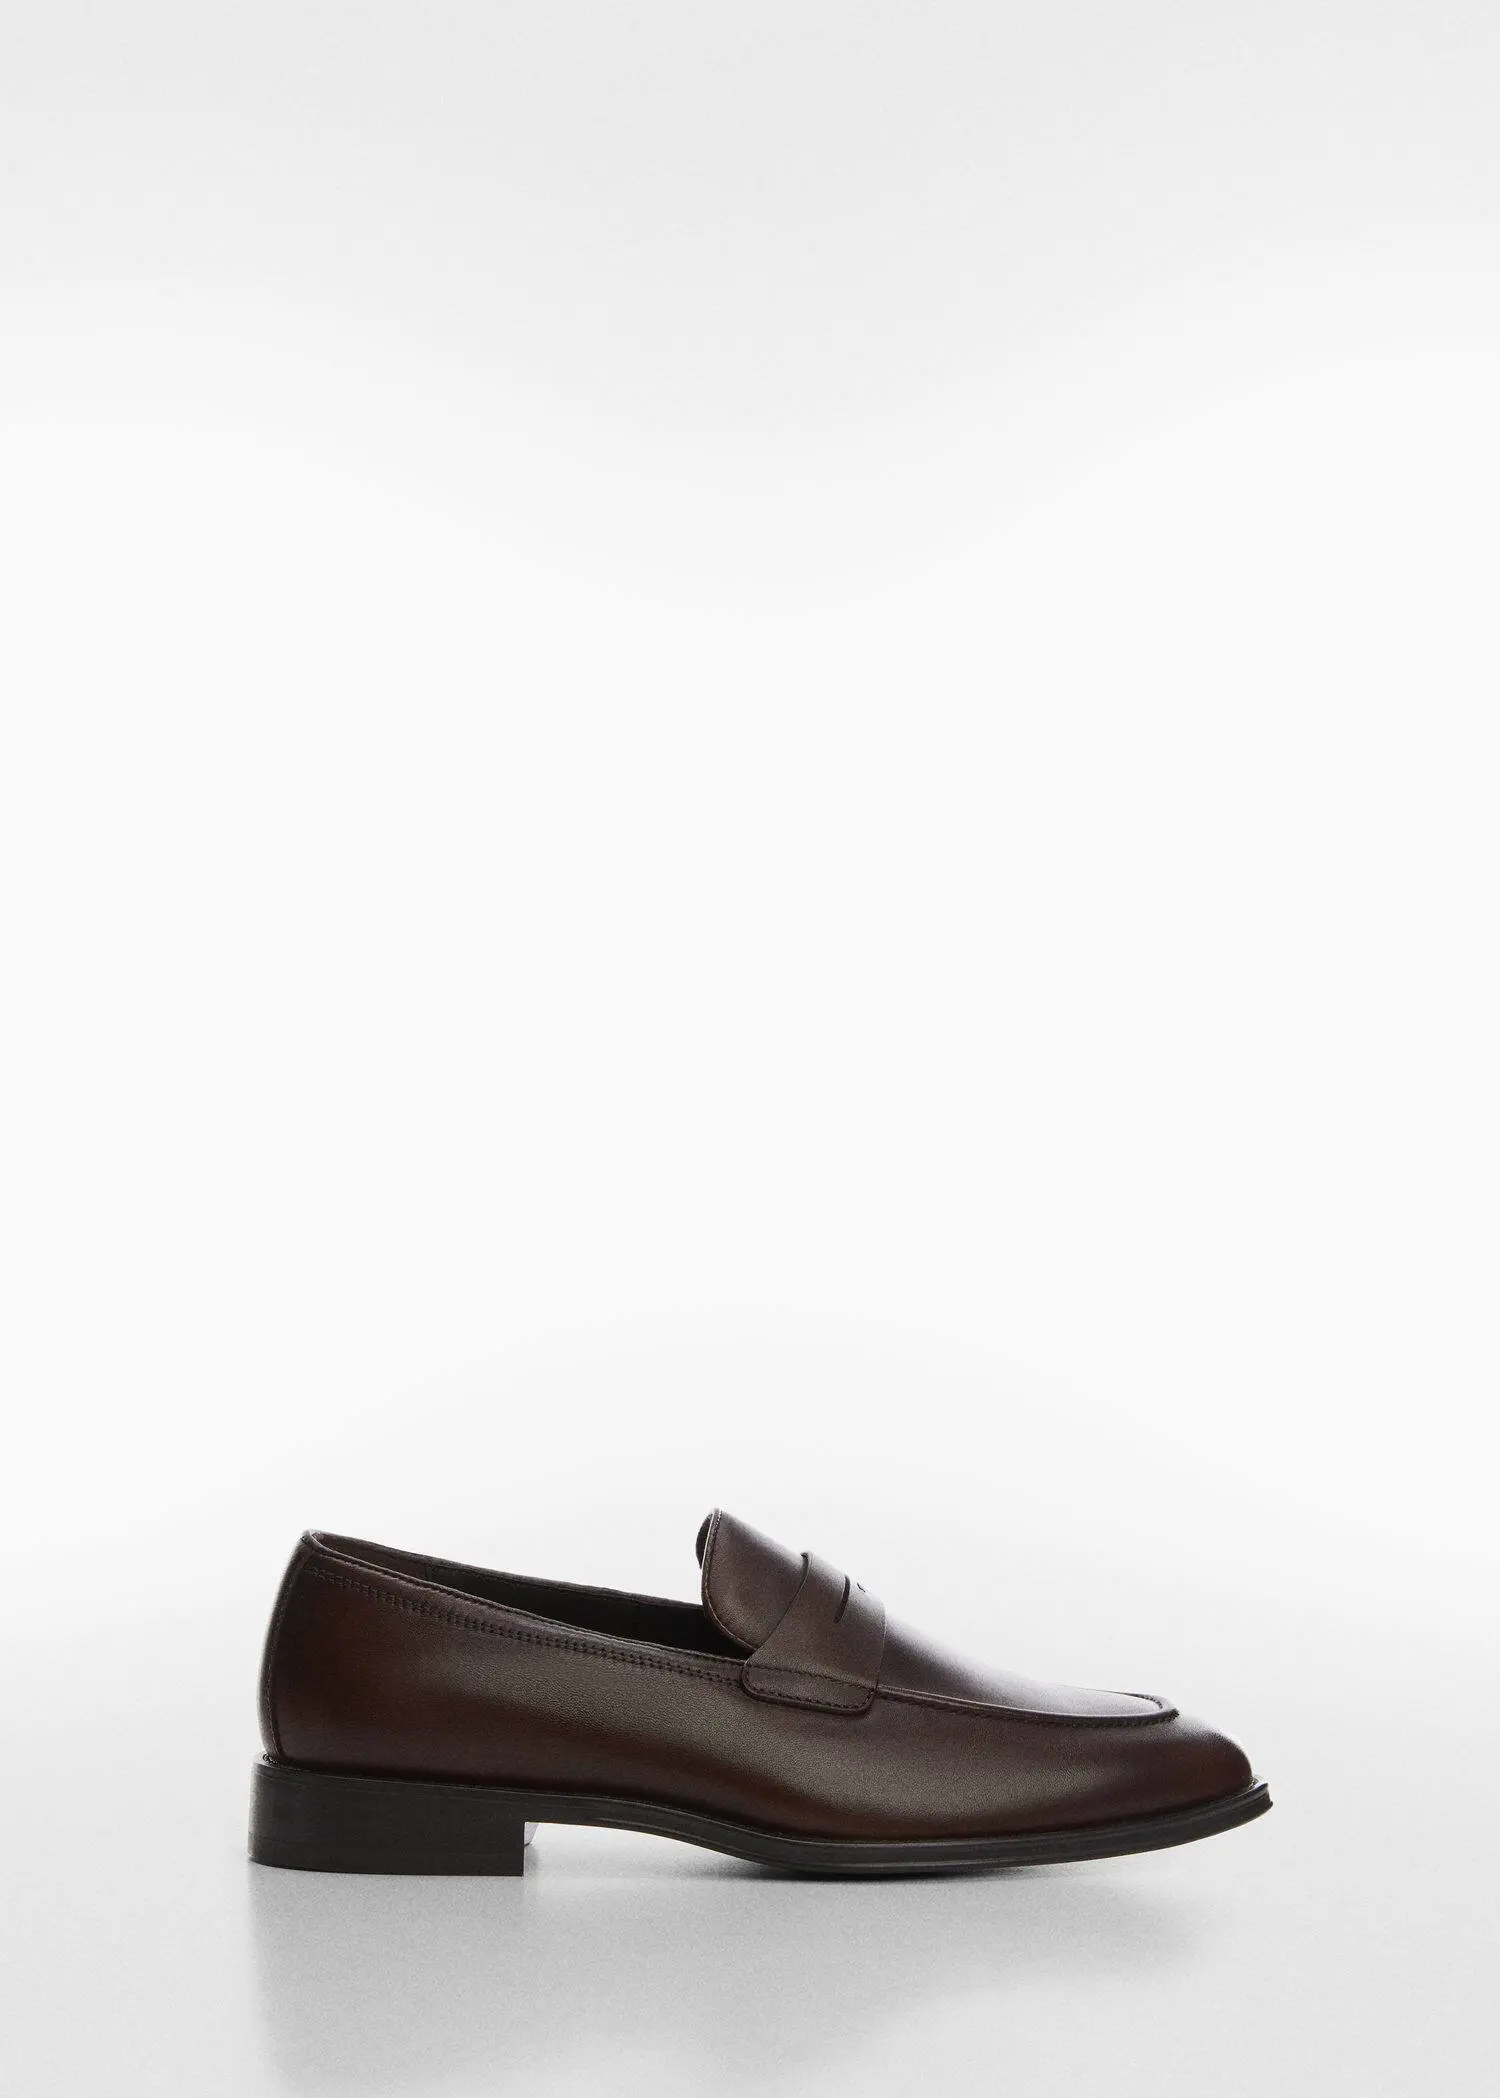 Mango Aged-leather loafers. a brown loafer is shown on a white background. 